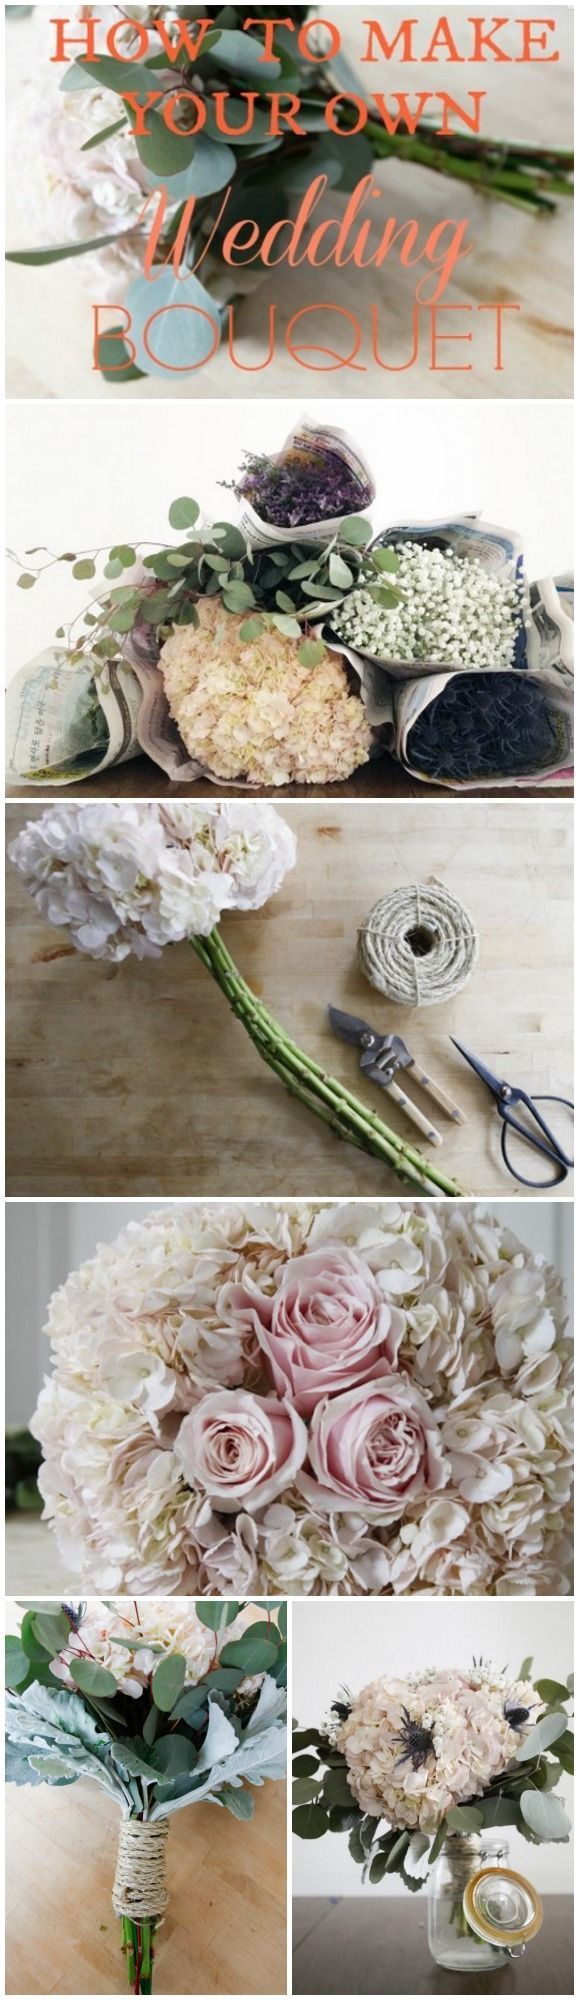 Easy Step By Step Directions How To Make Your Own Bouquet.  FYI I made all the bouquets for our daughter’s wedding.  It wasn’t